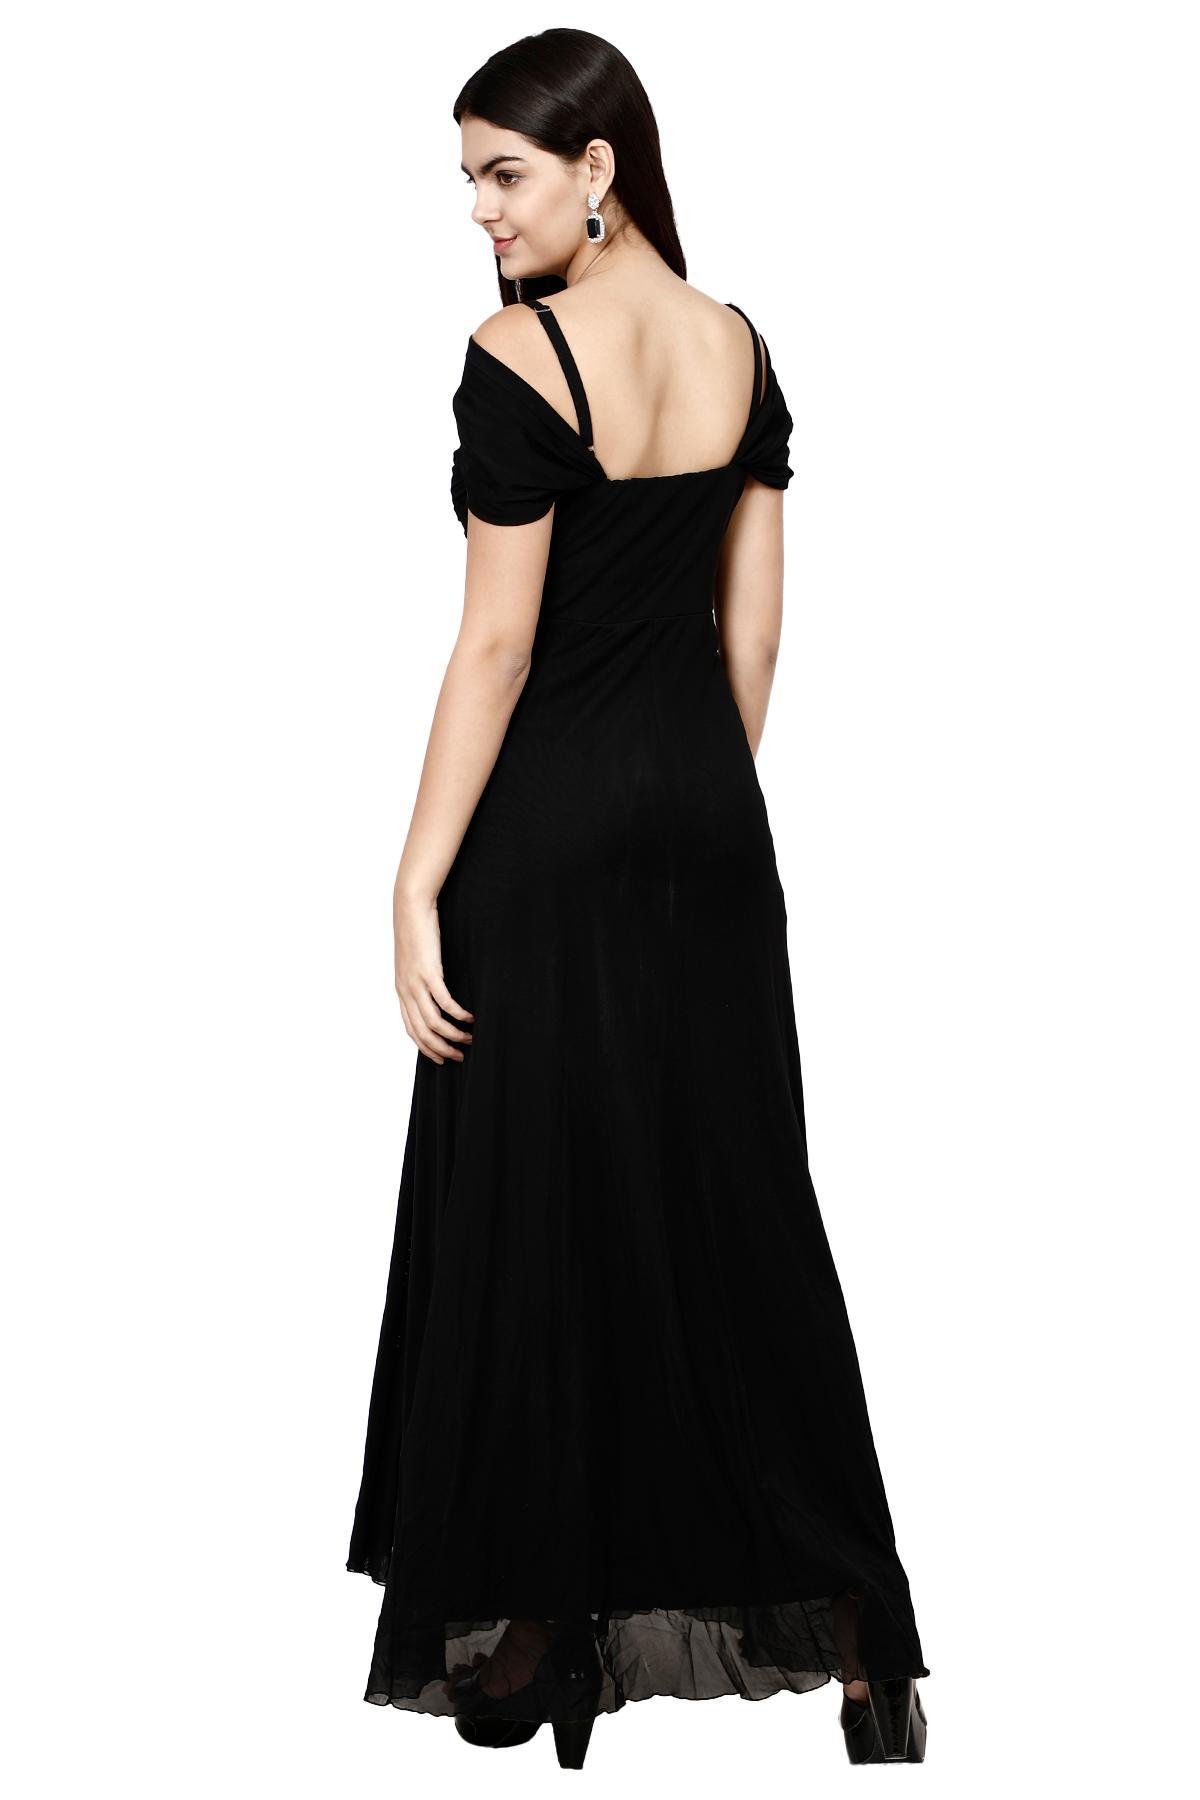 Gown Collection Online  Rent Designer Western Gown for Women and Men  Rentitbaecom